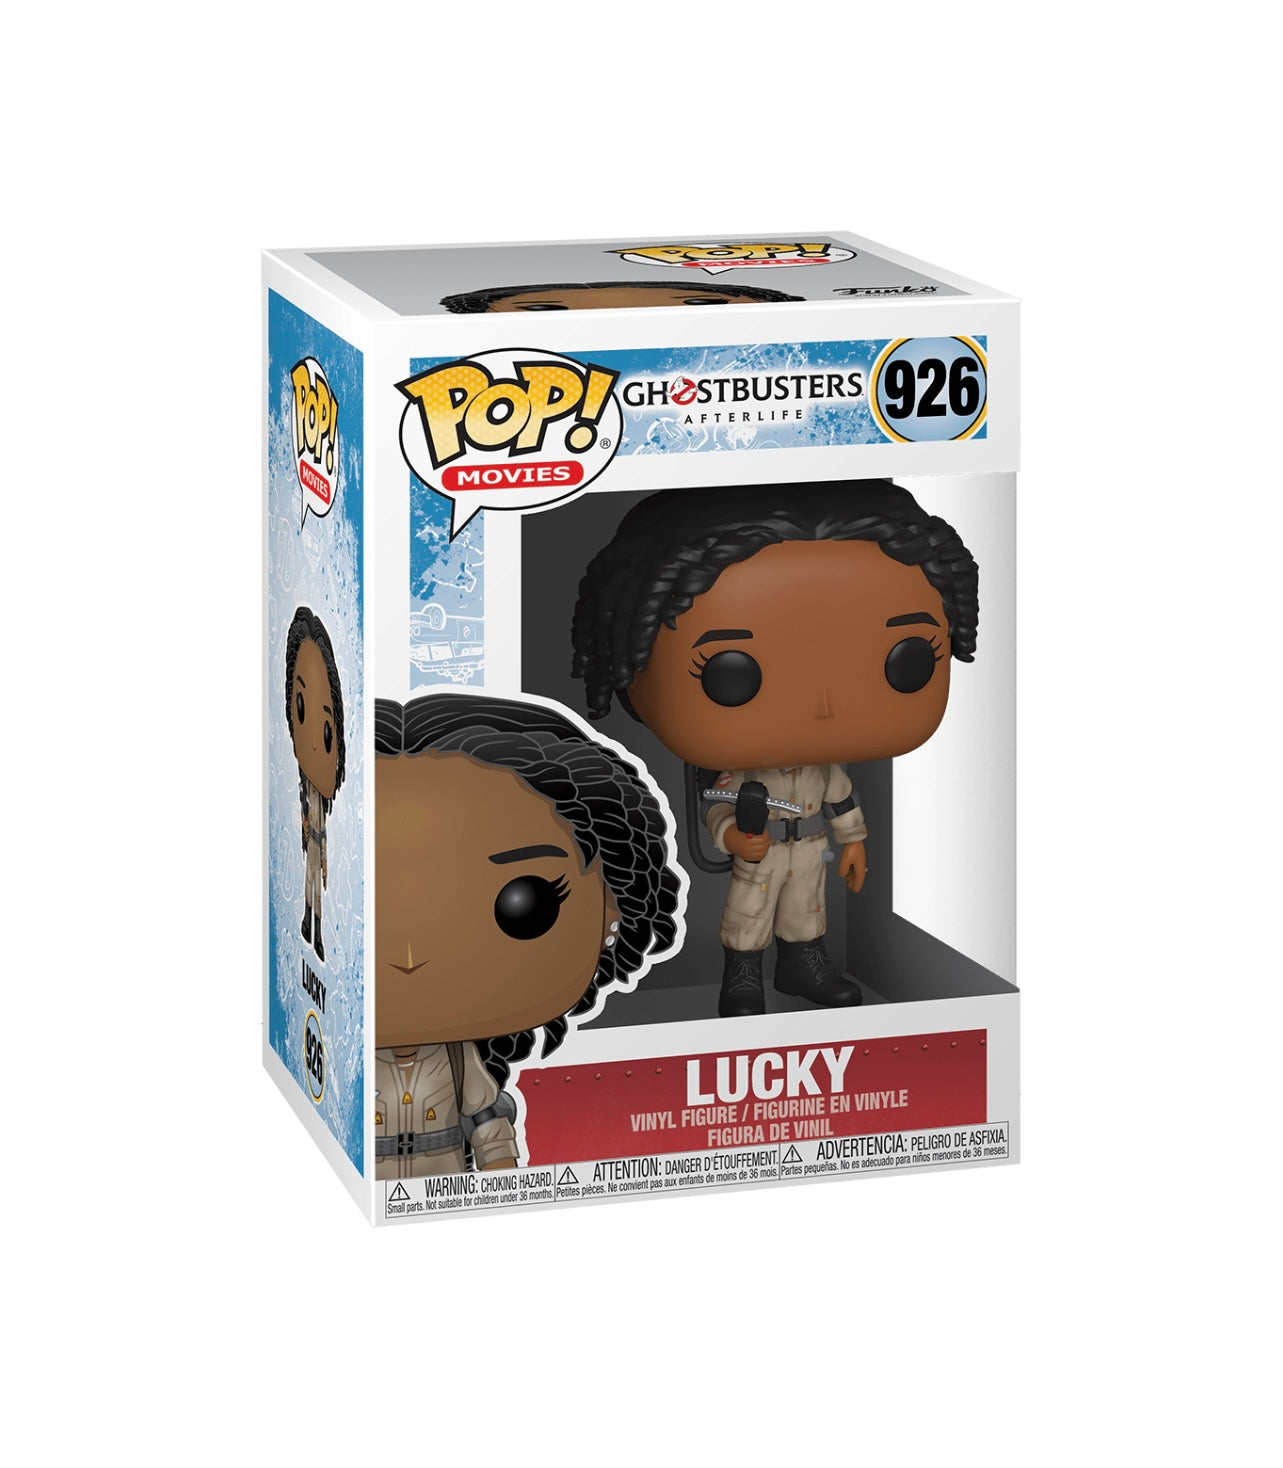 POP! Movies Ghostbusters Lucky #926